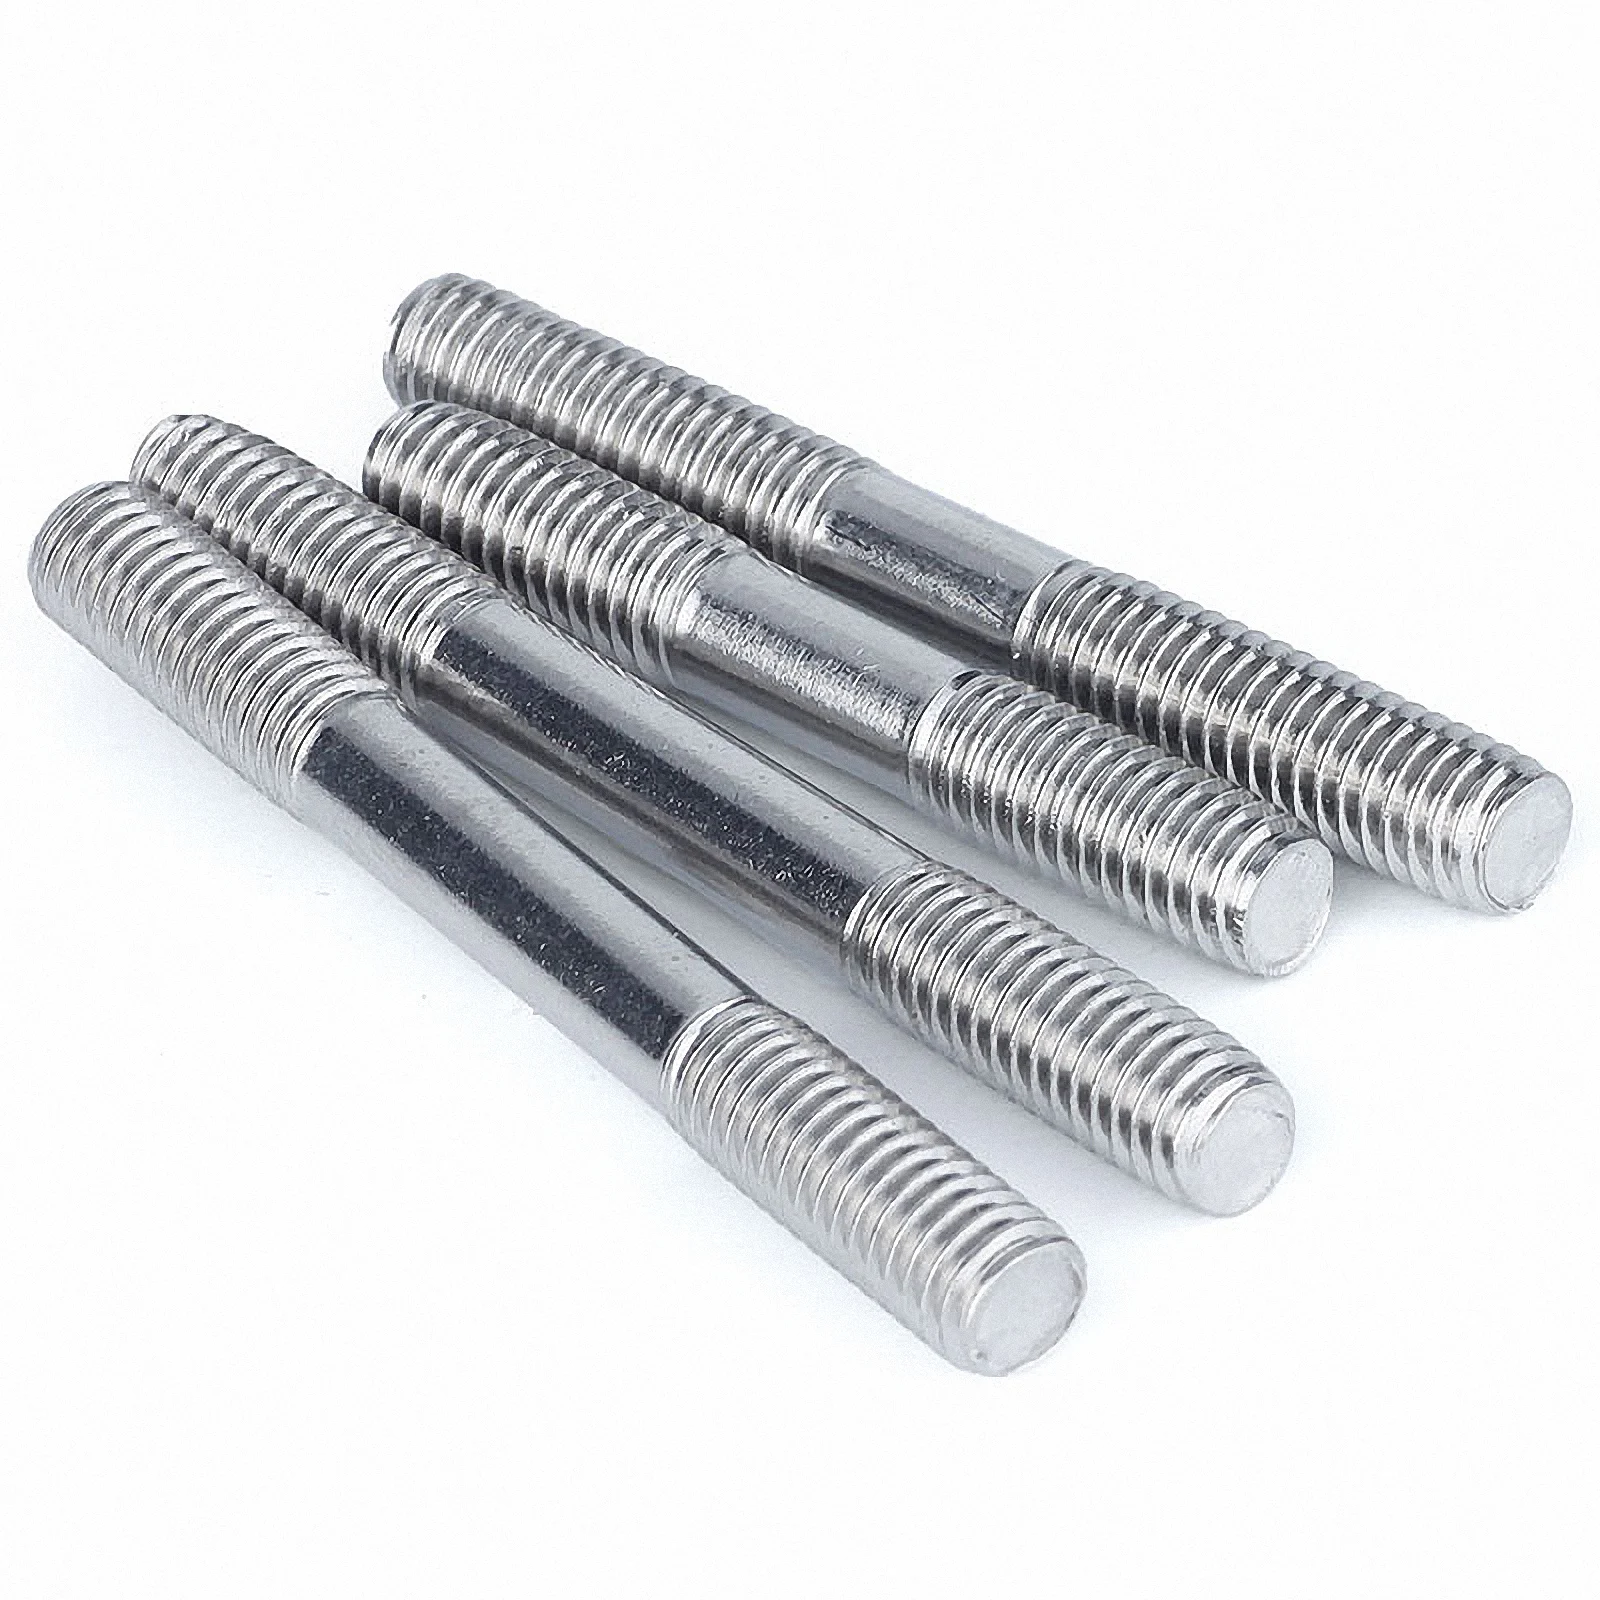 Details about   Double End Thread Stud Bolts Screw Rod Tooth Stick M6 M8 M10 M12 316 Stainless 